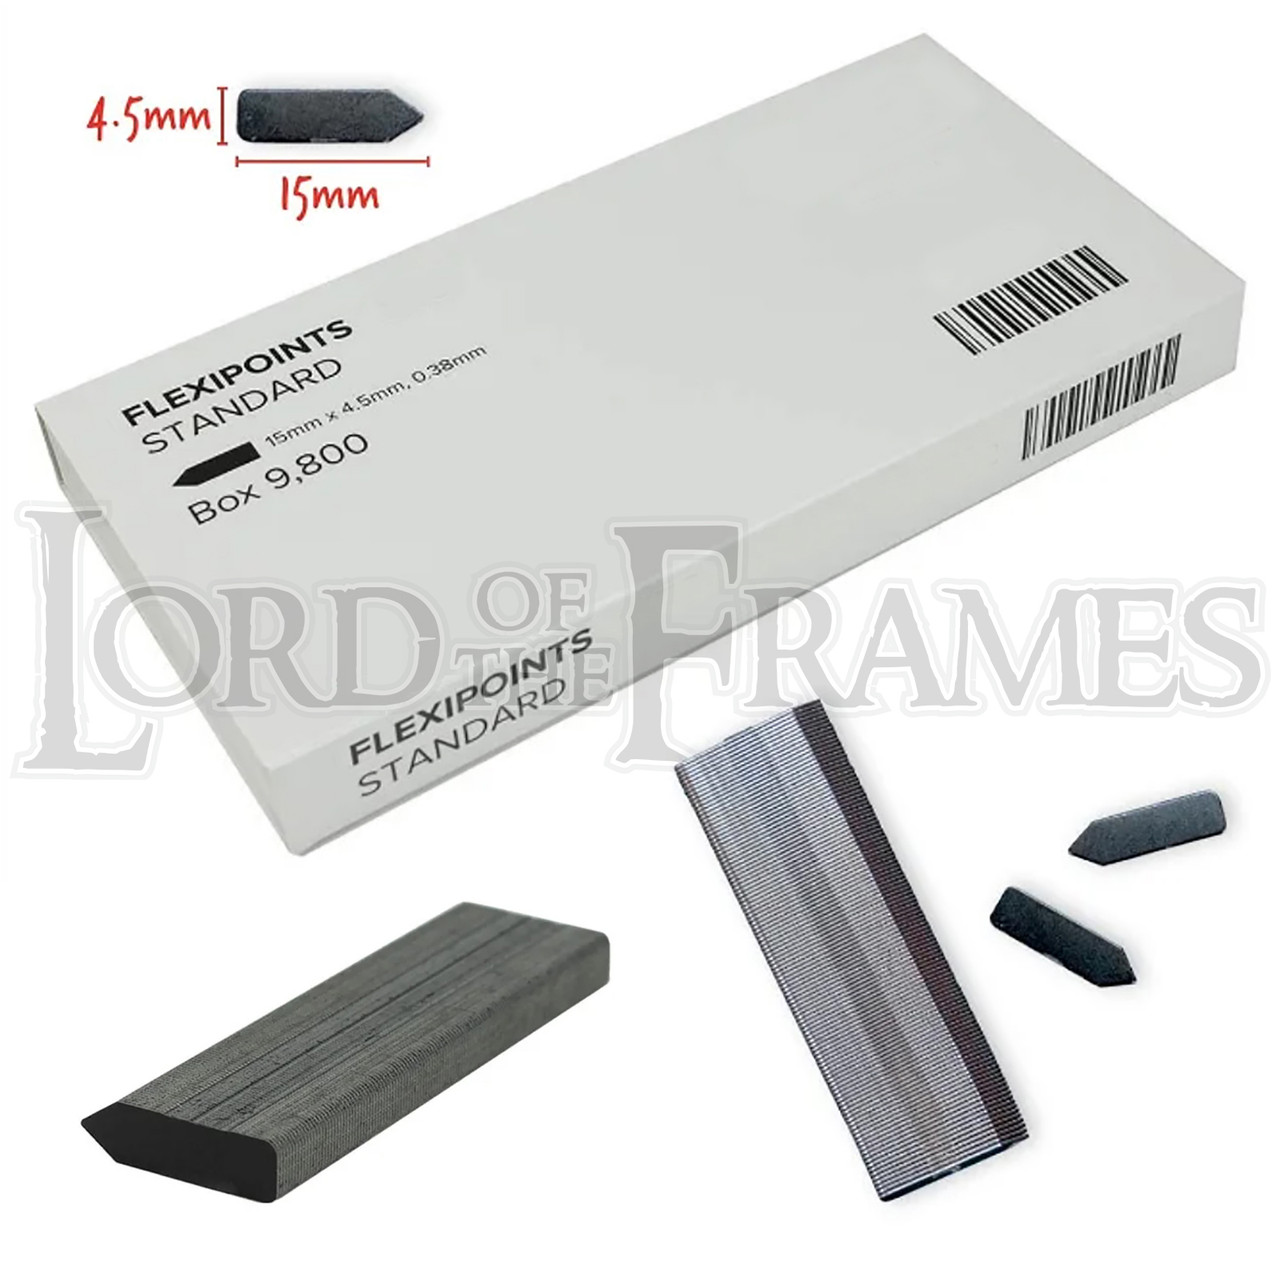 Staplers  LION Picture Framing Supplies Ltd